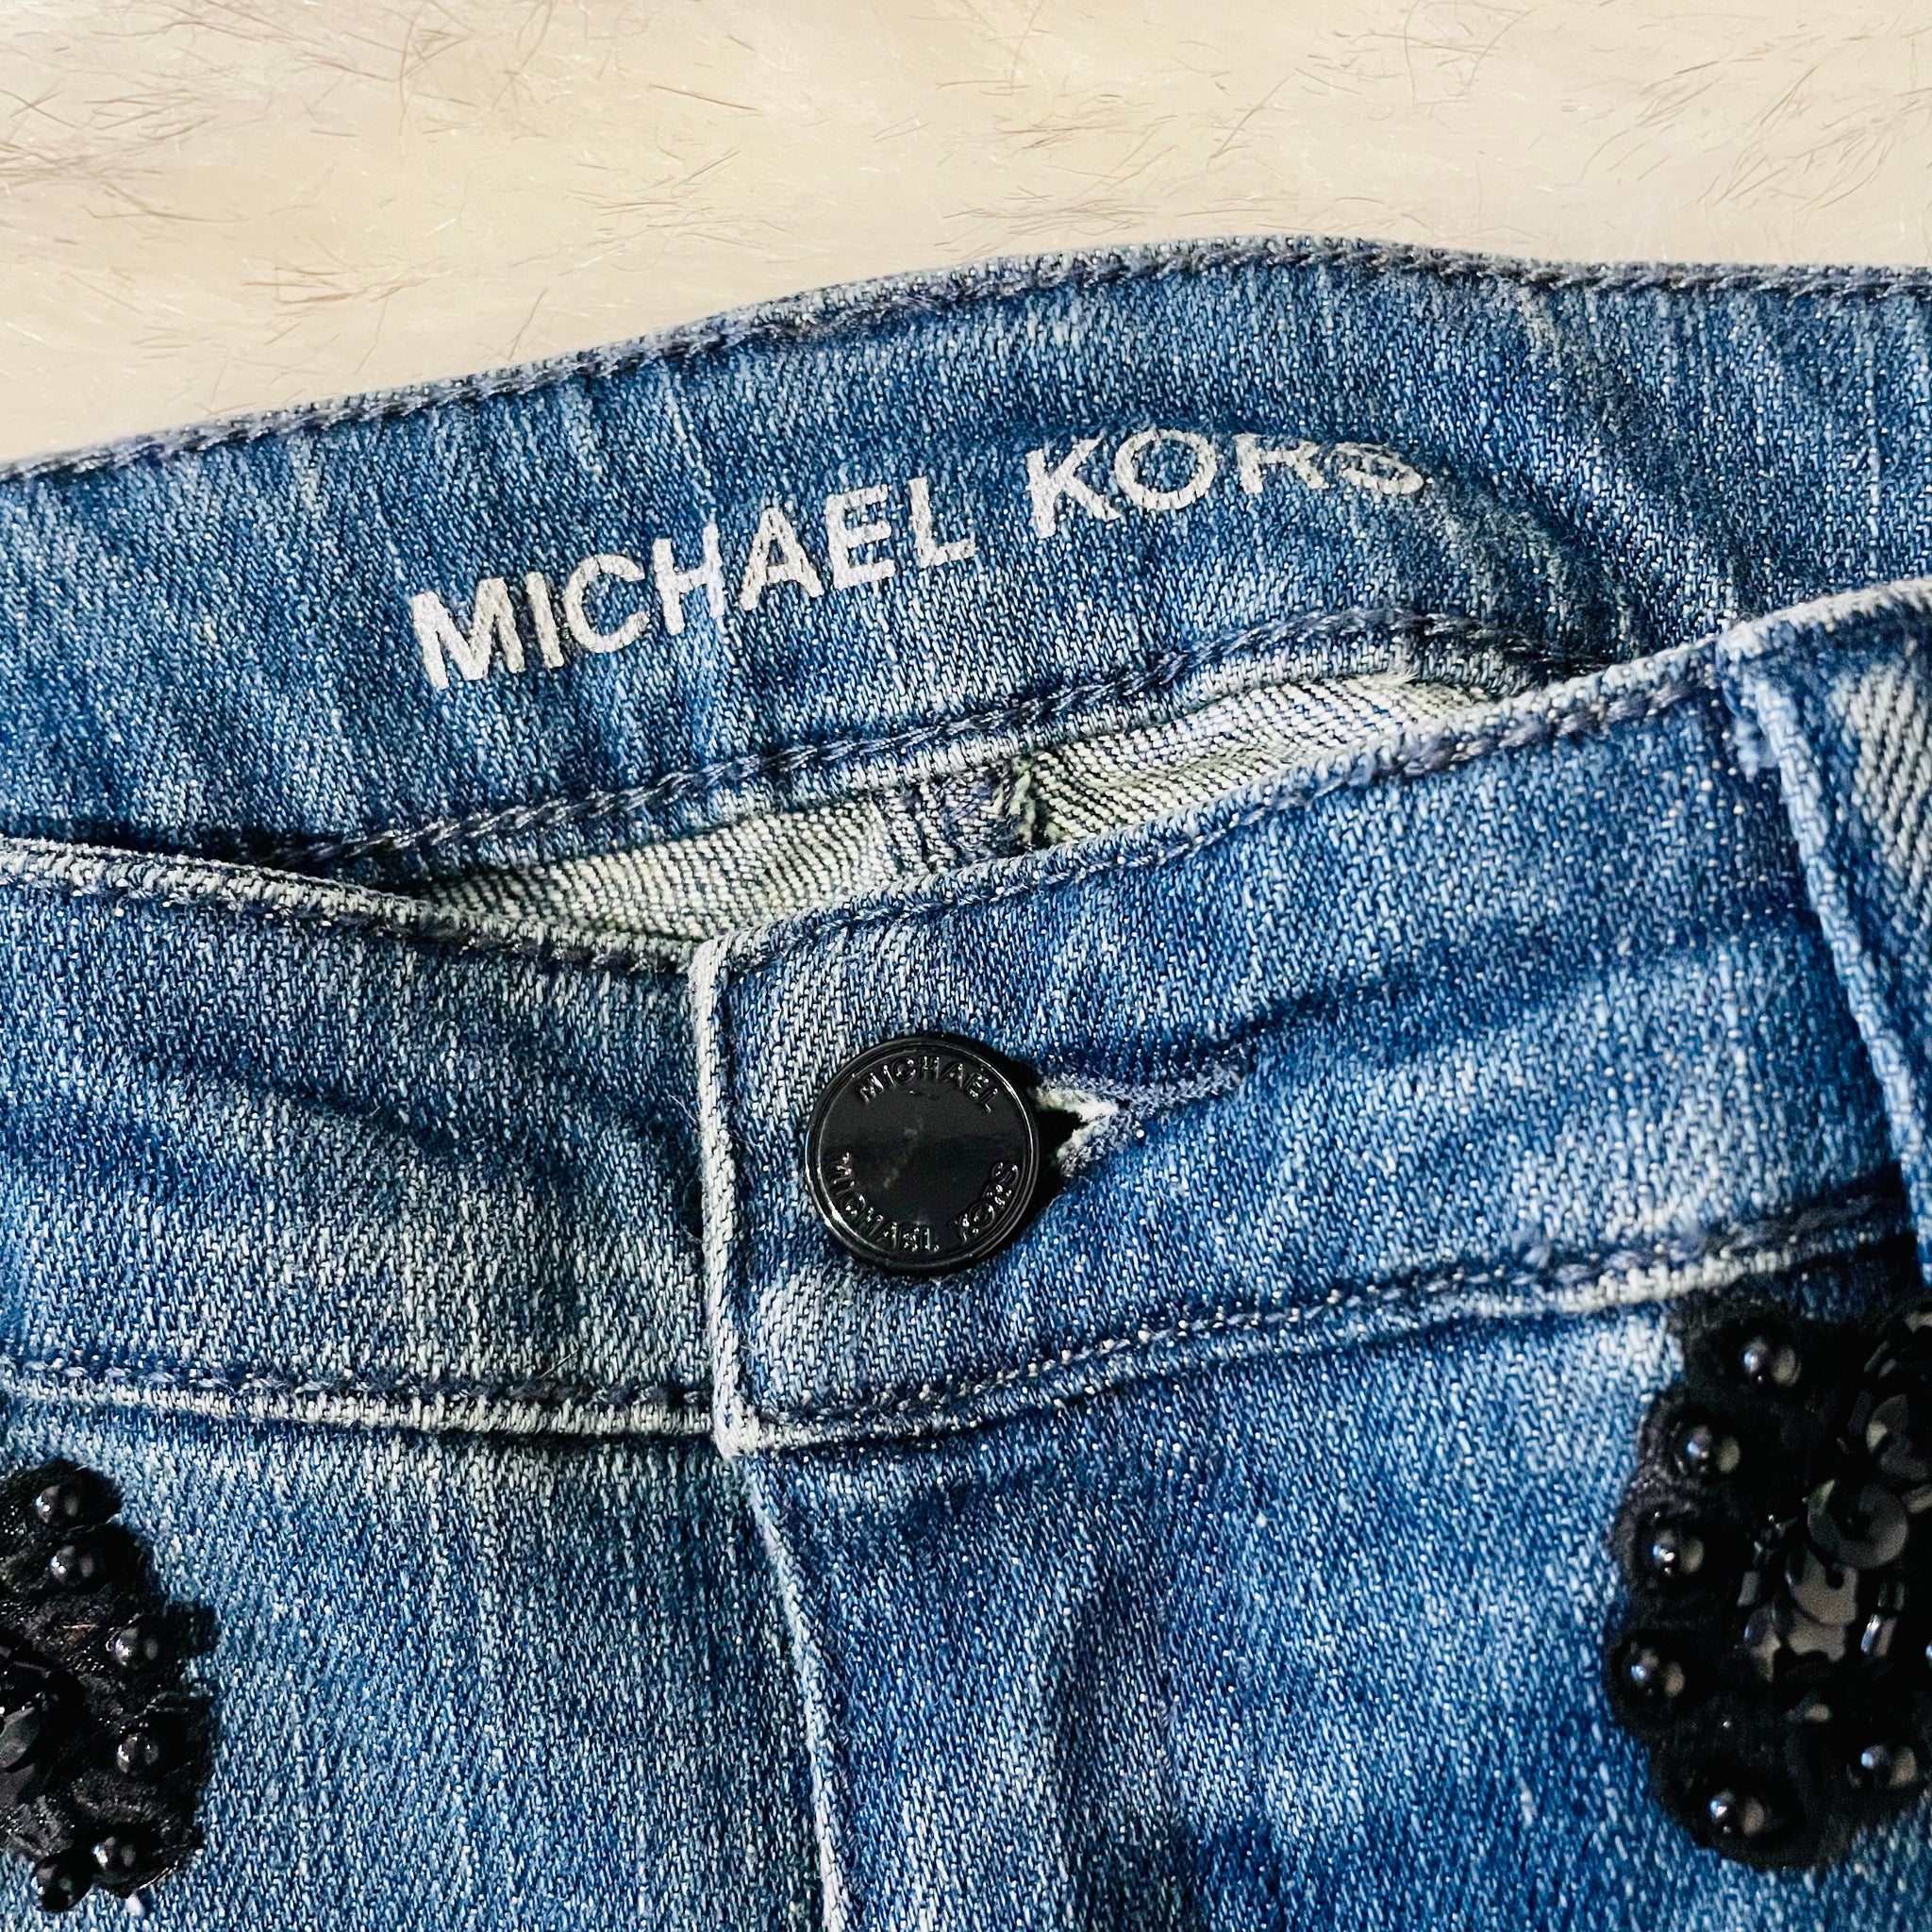 NEW Michael Kors beaded bootcut jeans, Size 2